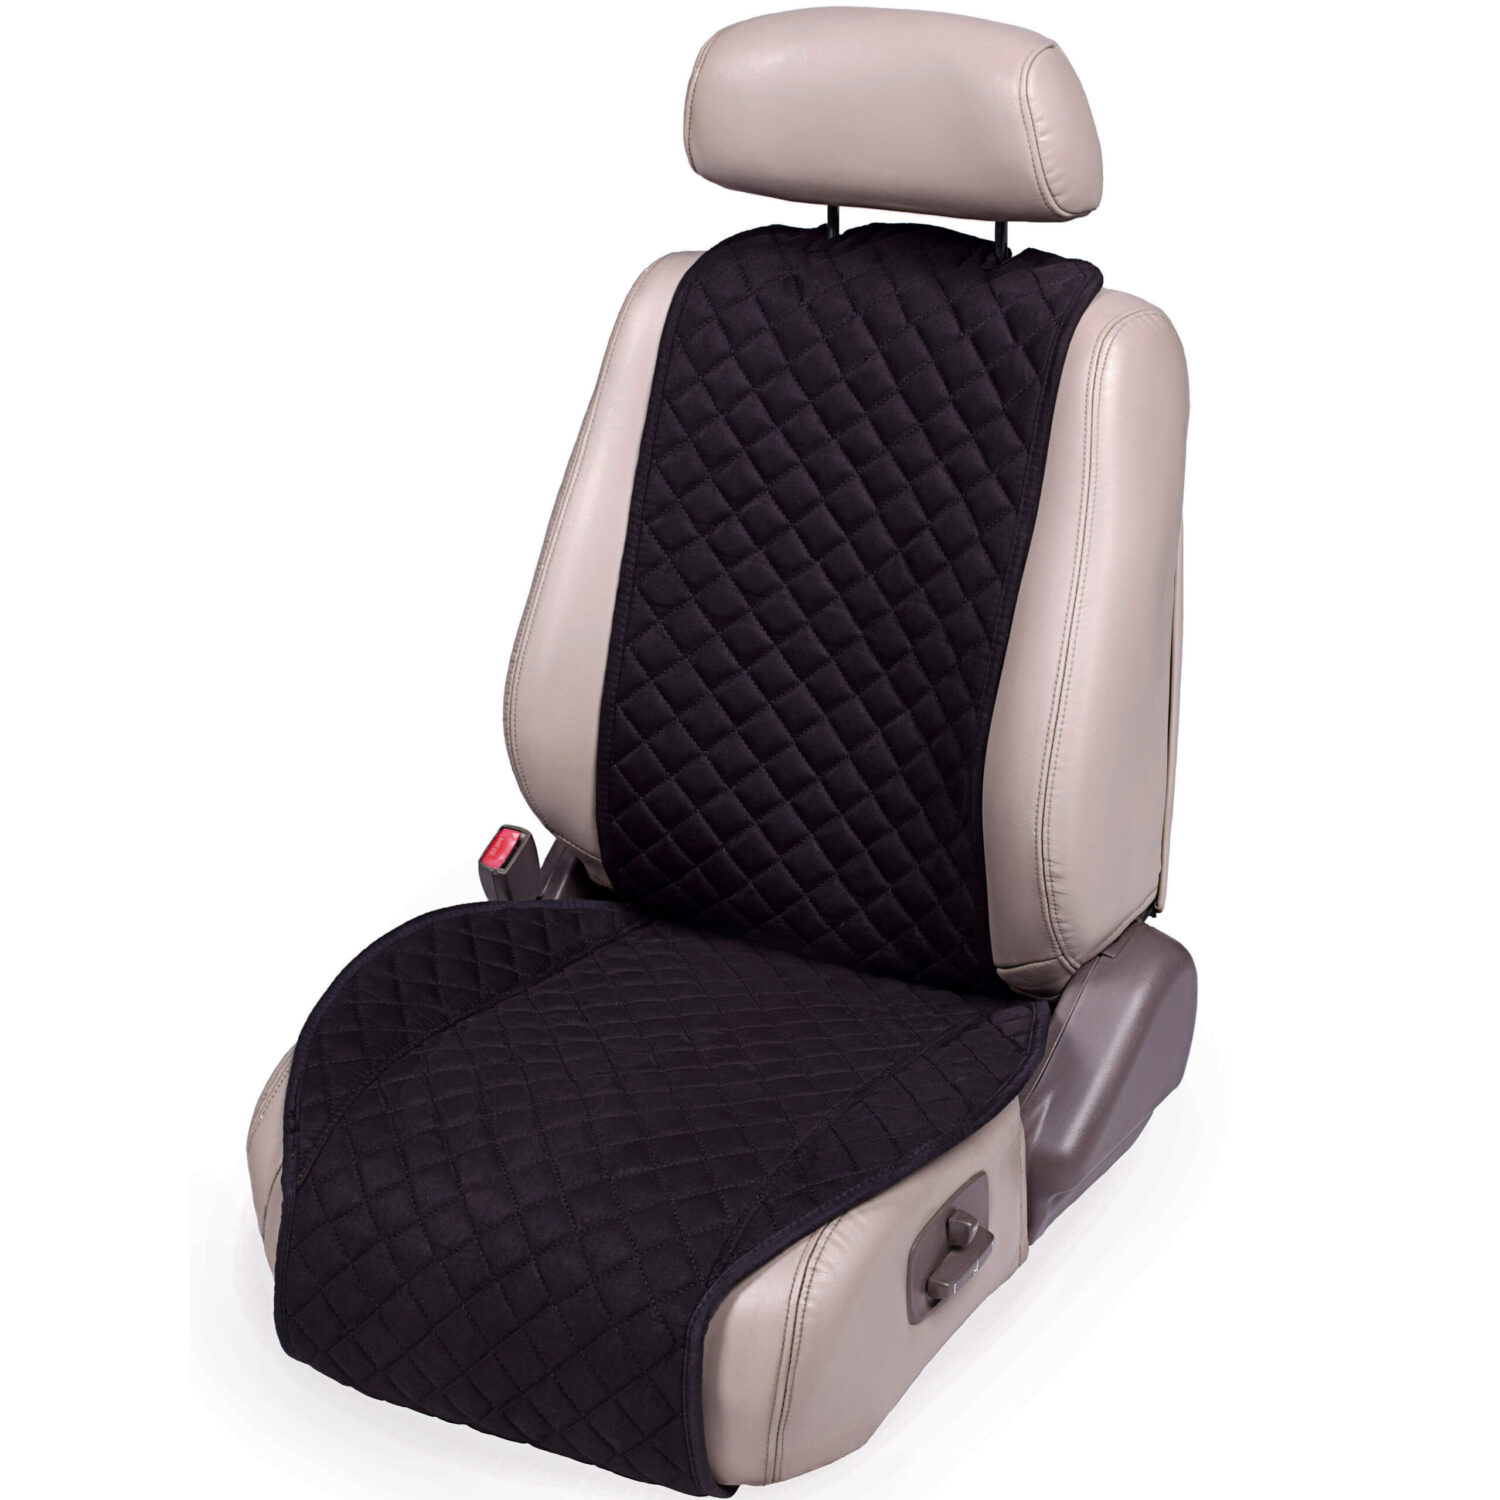 Car Seat Cover/Protector, Car Seat Cushion, Breathable, Comfort